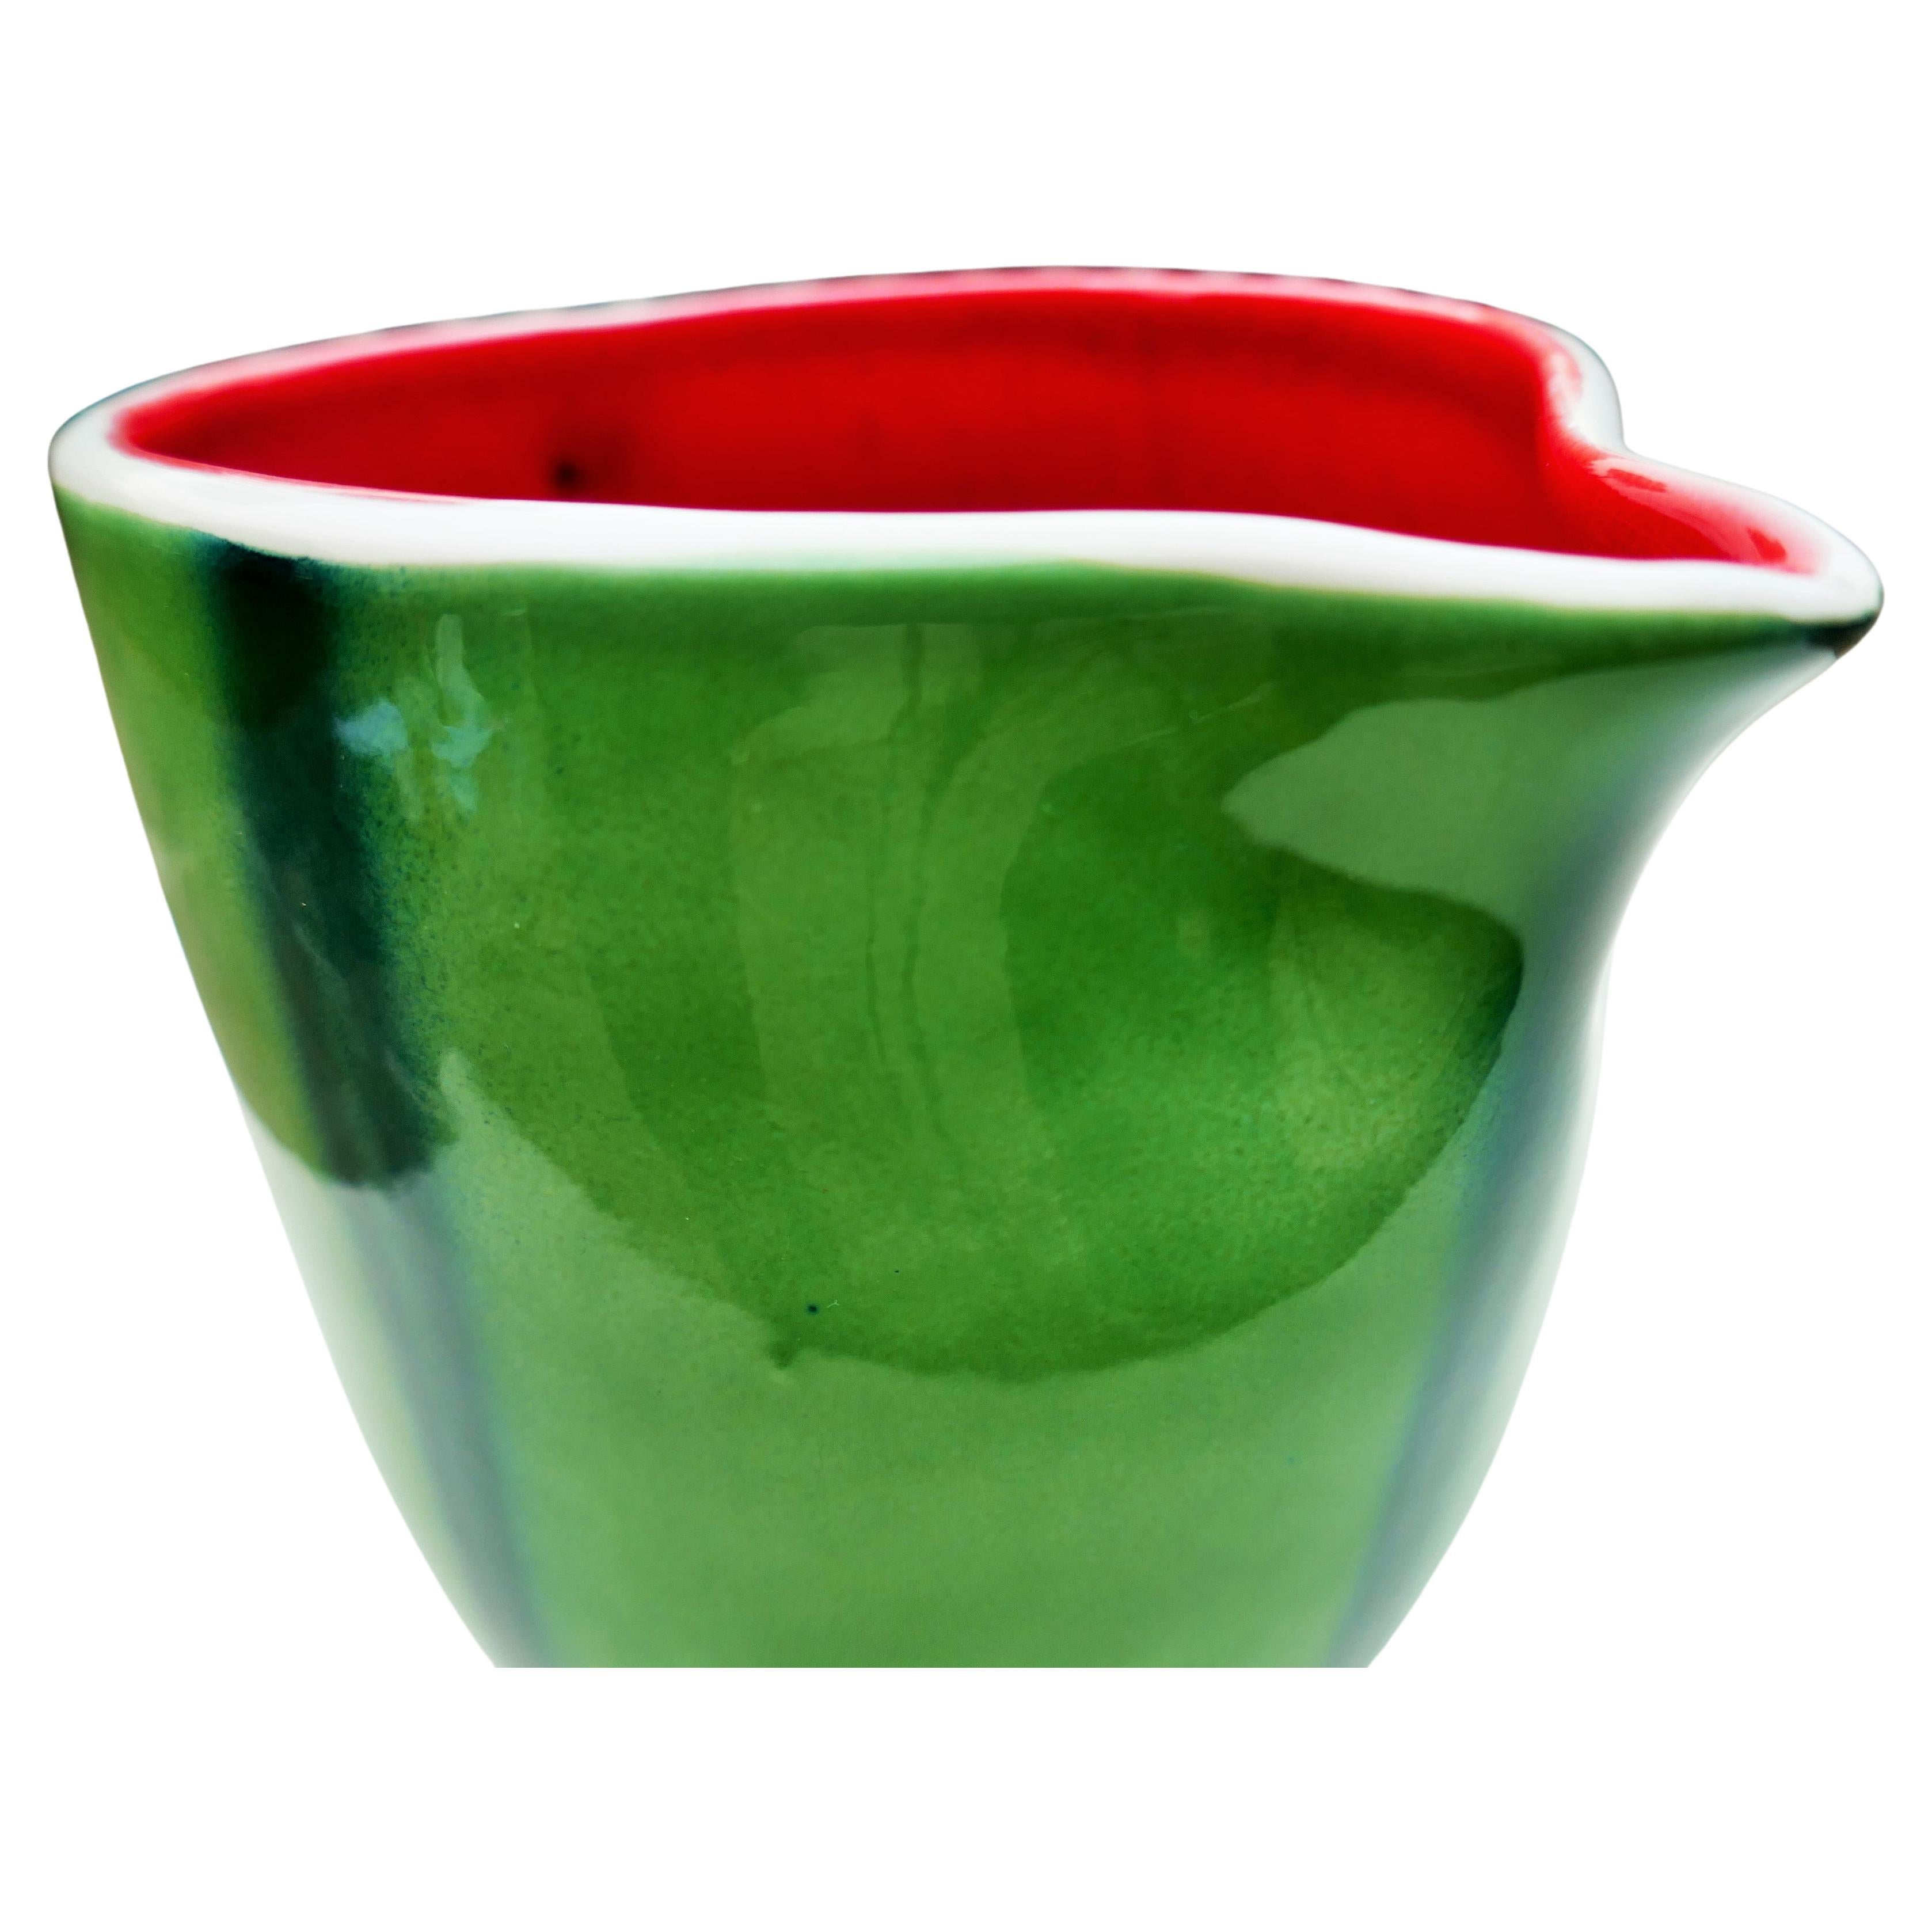 Italian Italica Ars Production Pitcher - Watermelon For Sale